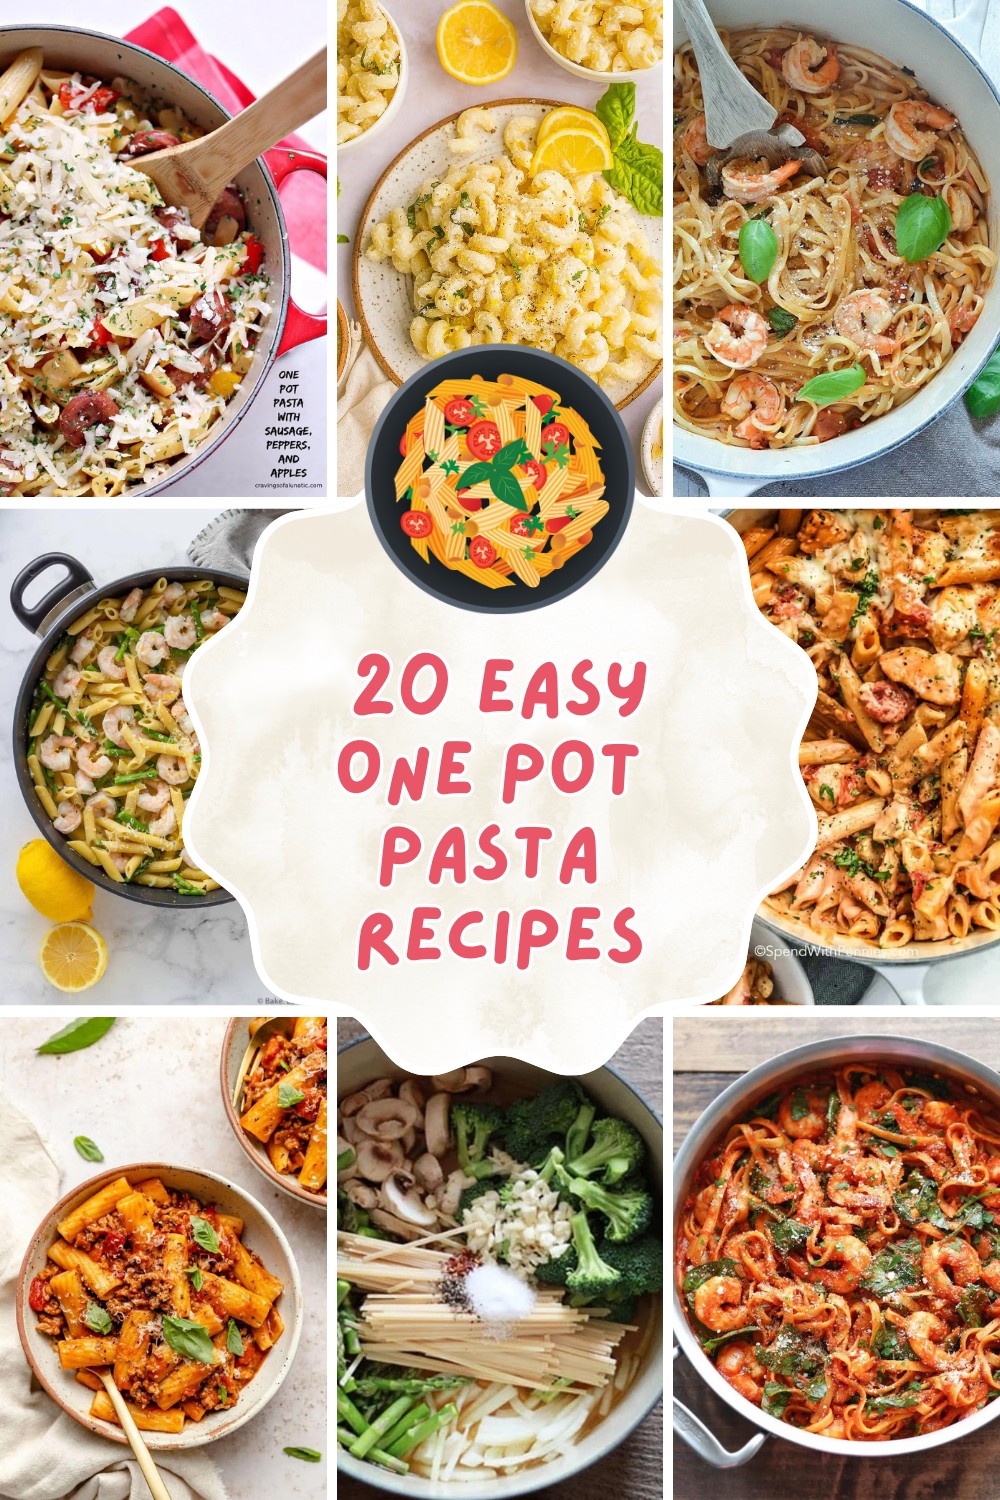 Say goodbye to complicated dinners! These one pot pasta recipes are a game changer. Just chop, toss, and cook everything in one pot – even the pasta! Perfect for those busy nights when you need a tasty meal without the fuss. 🥕🍅🍲 #QuickMeals #OnePotCooking







